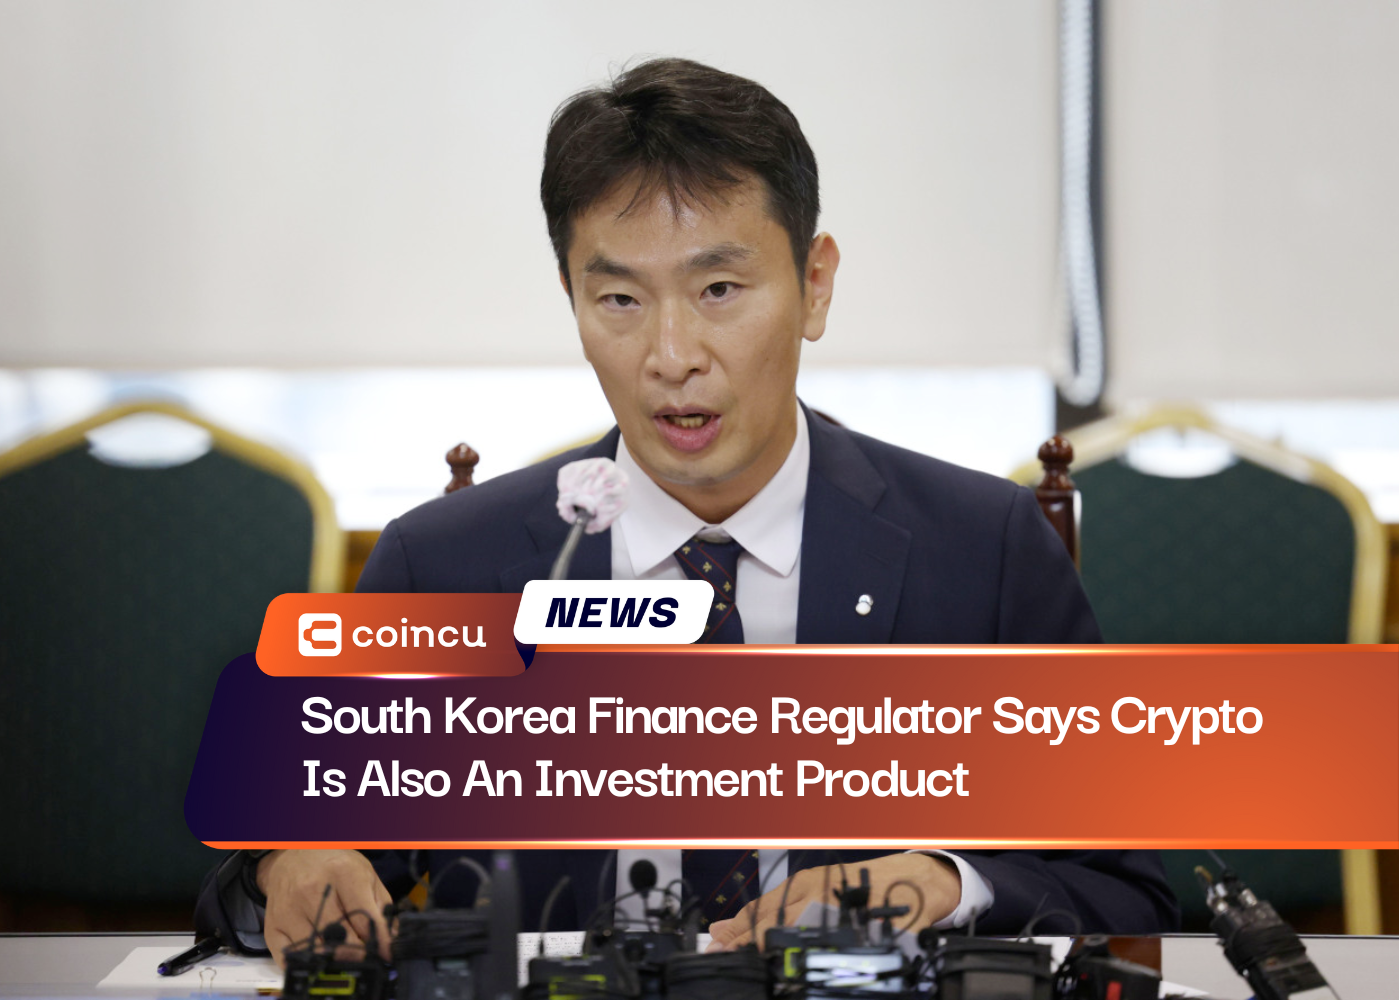 South Korea Finance Regulator Says Crypto Is Also An Investment Product